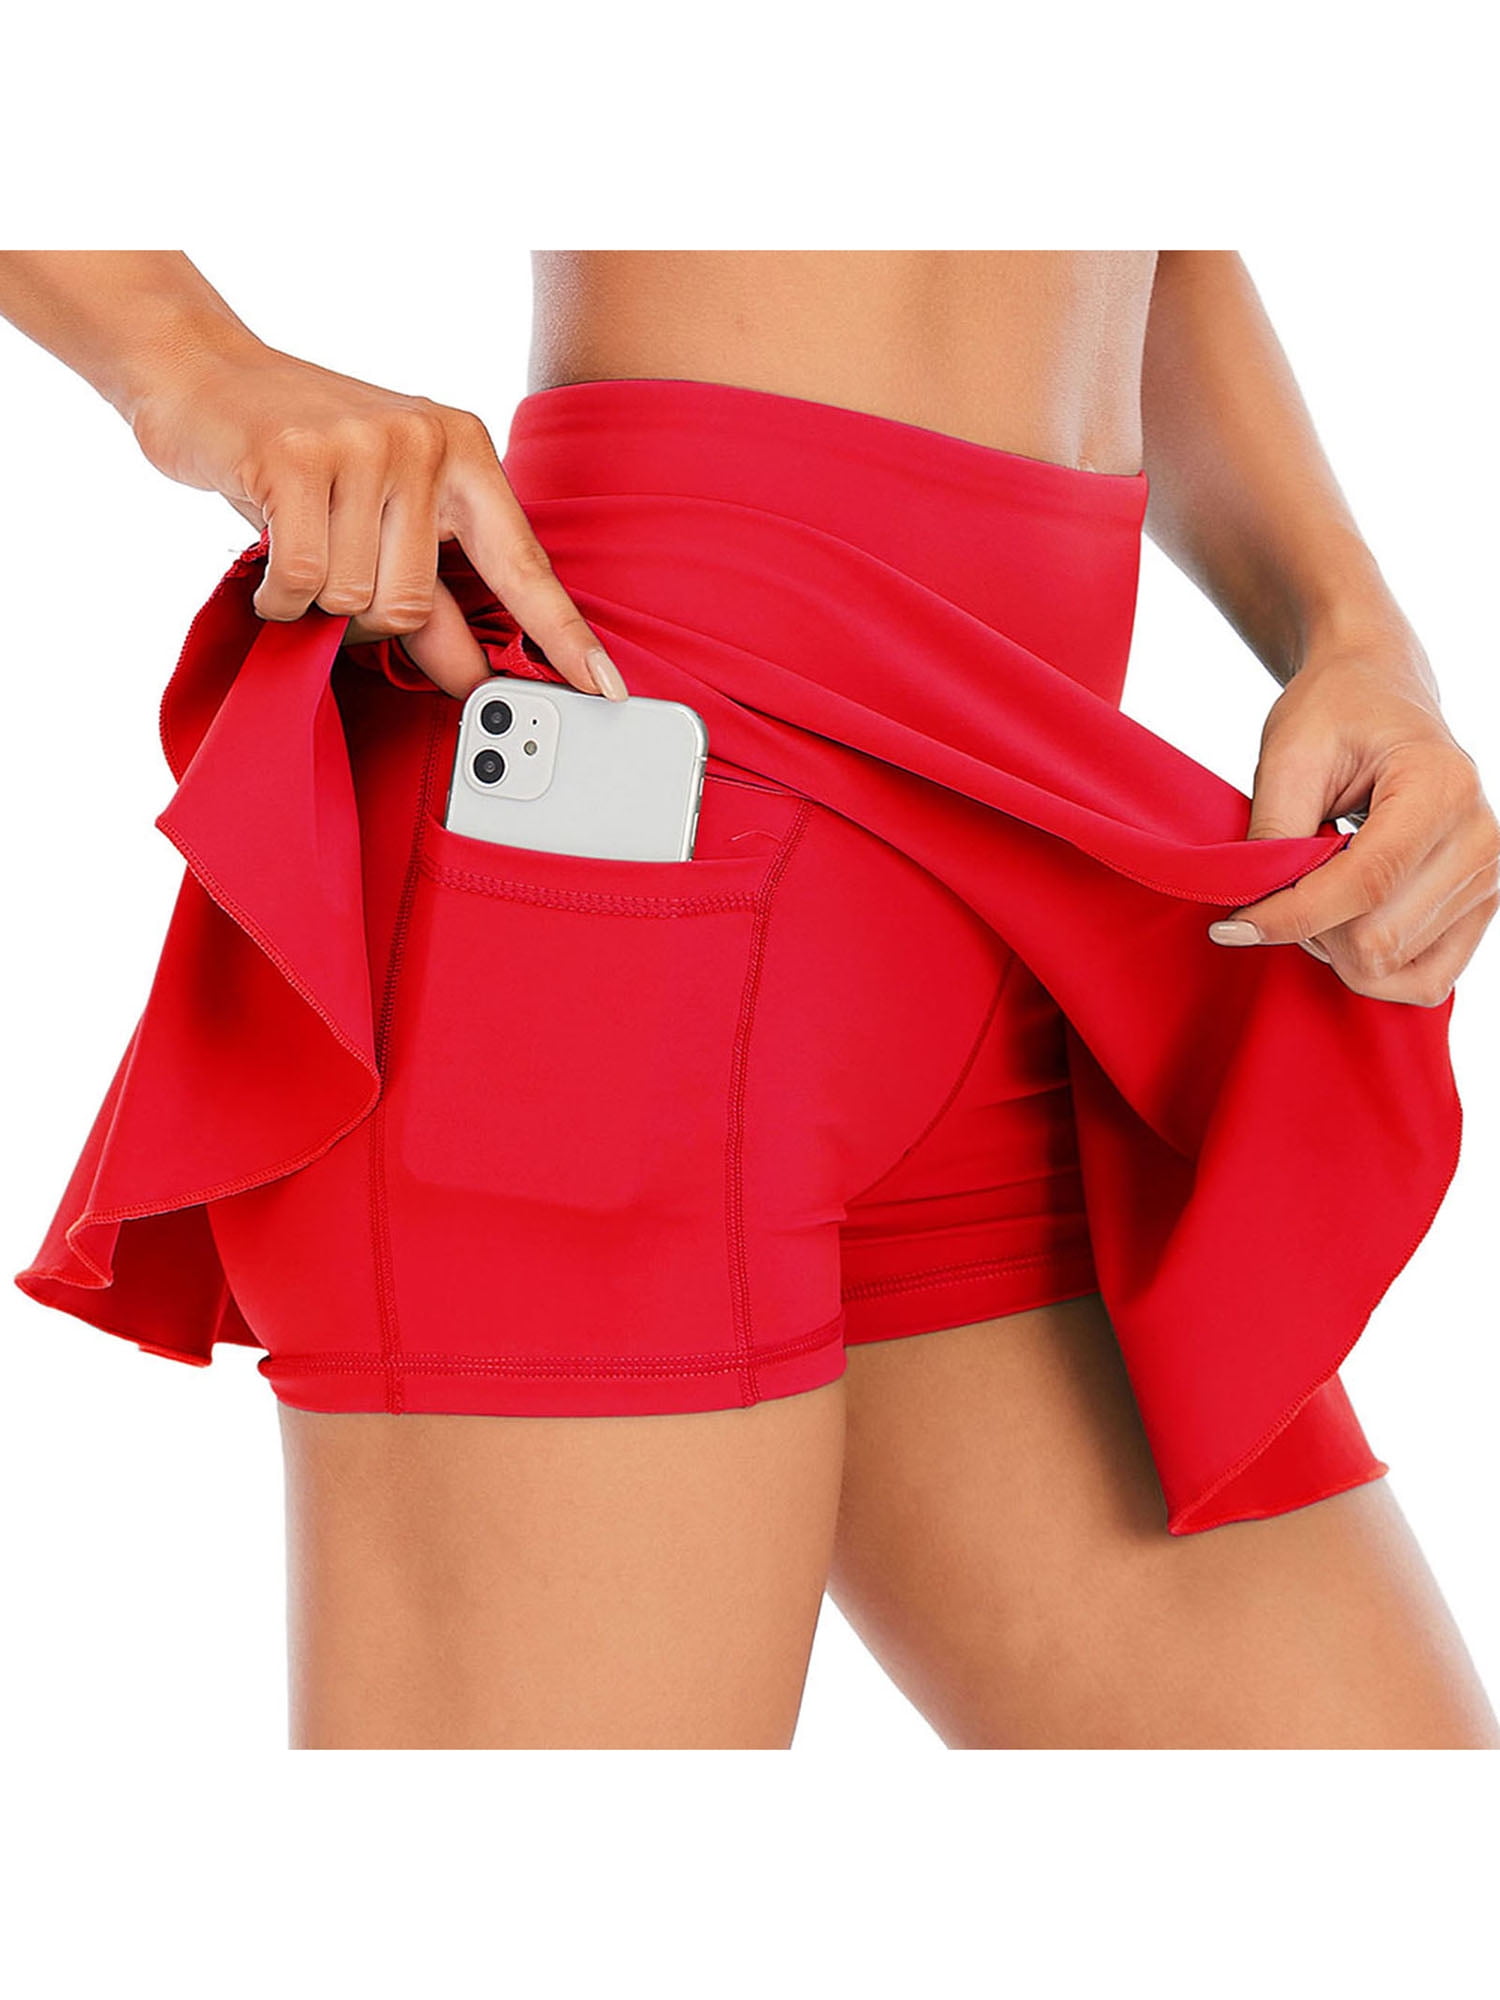 Women's Tennis Skorts Pleated Mini Skirts with Pockets Lightweight Athletic  Sports Skirt with Built-in Shorts for Golf Running Workout - Walmart.com